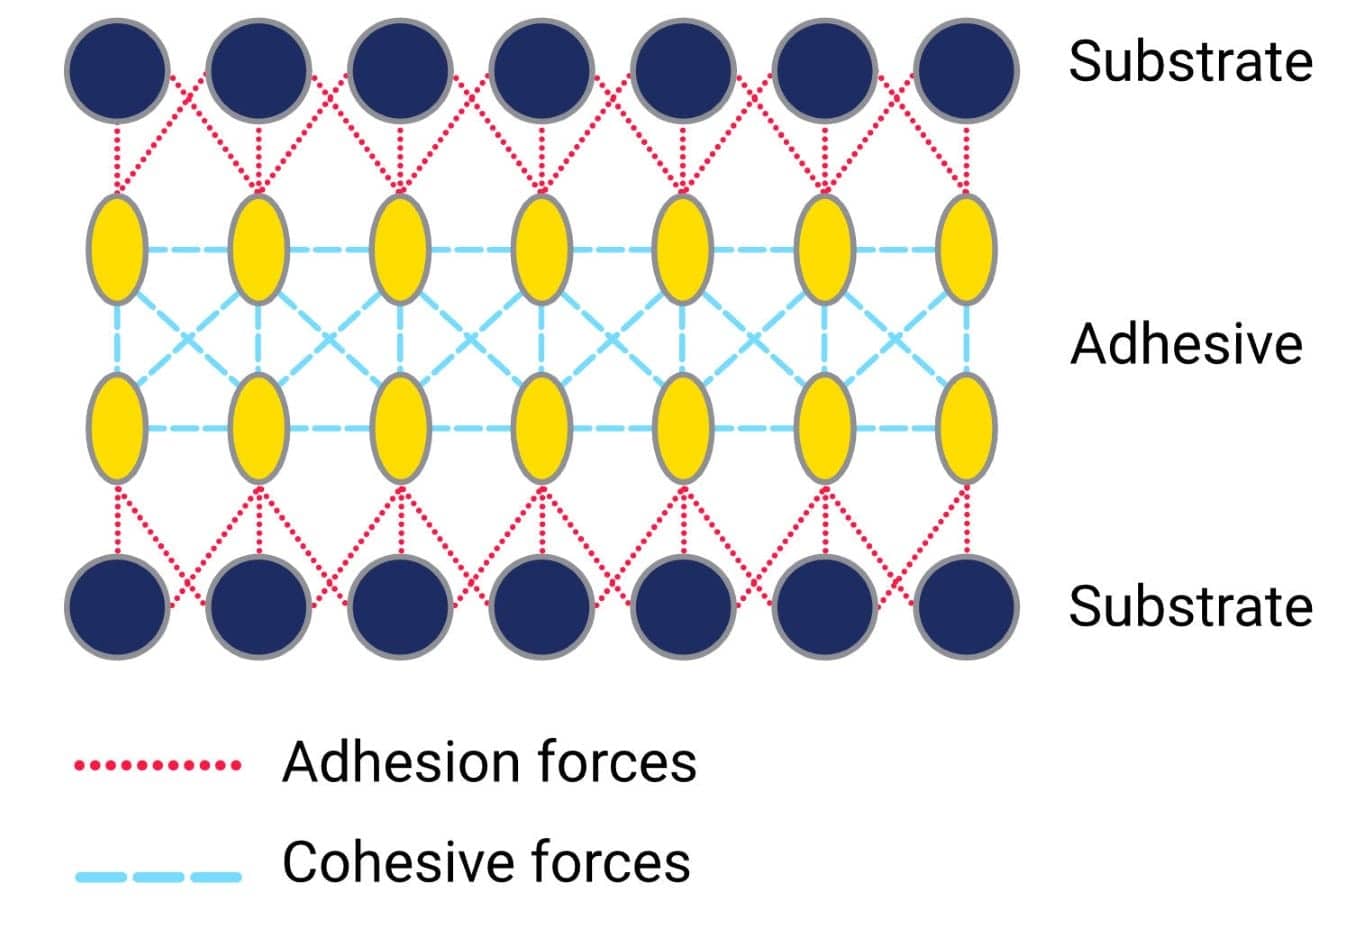 Diagram of substrates with ahesive and cohesive forces